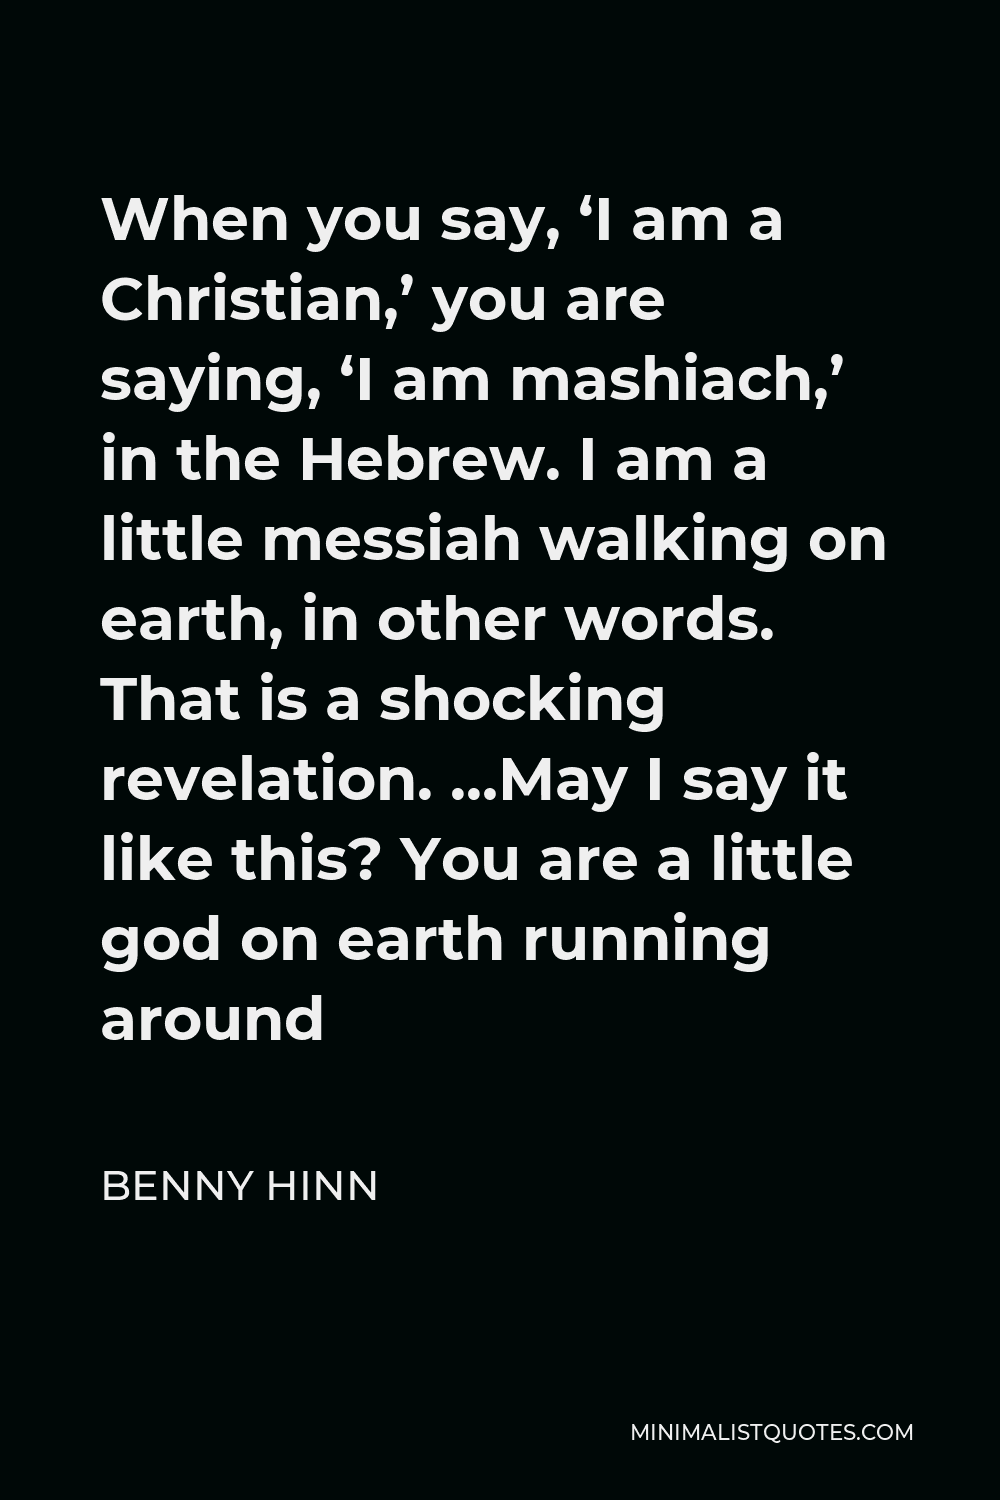 Benny Hinn Quote - When you say, ‘I am a Christian,’ you are saying, ‘I am mashiach,’ in the Hebrew. I am a little messiah walking on earth, in other words. That is a shocking revelation. …May I say it like this? You are a little god on earth running around